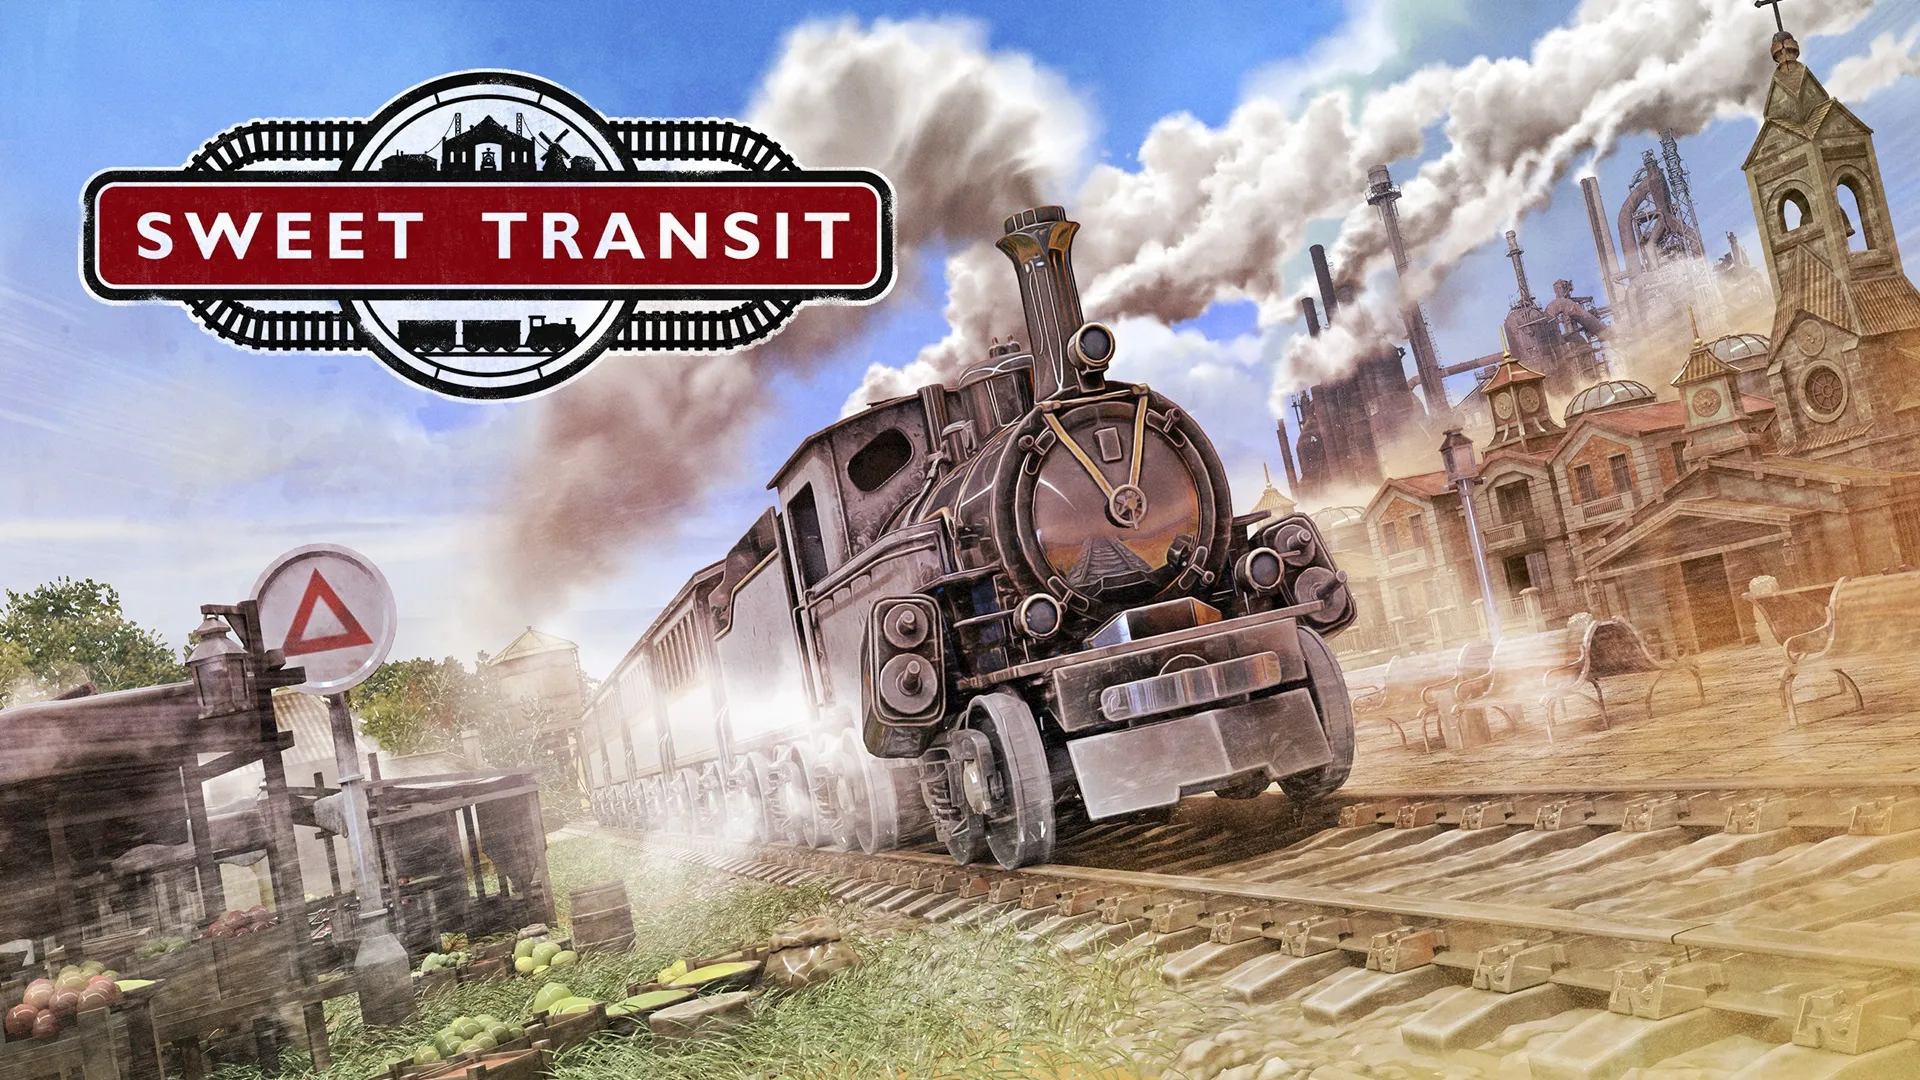 Sweet Transit is an amazing city and train builder out of early access